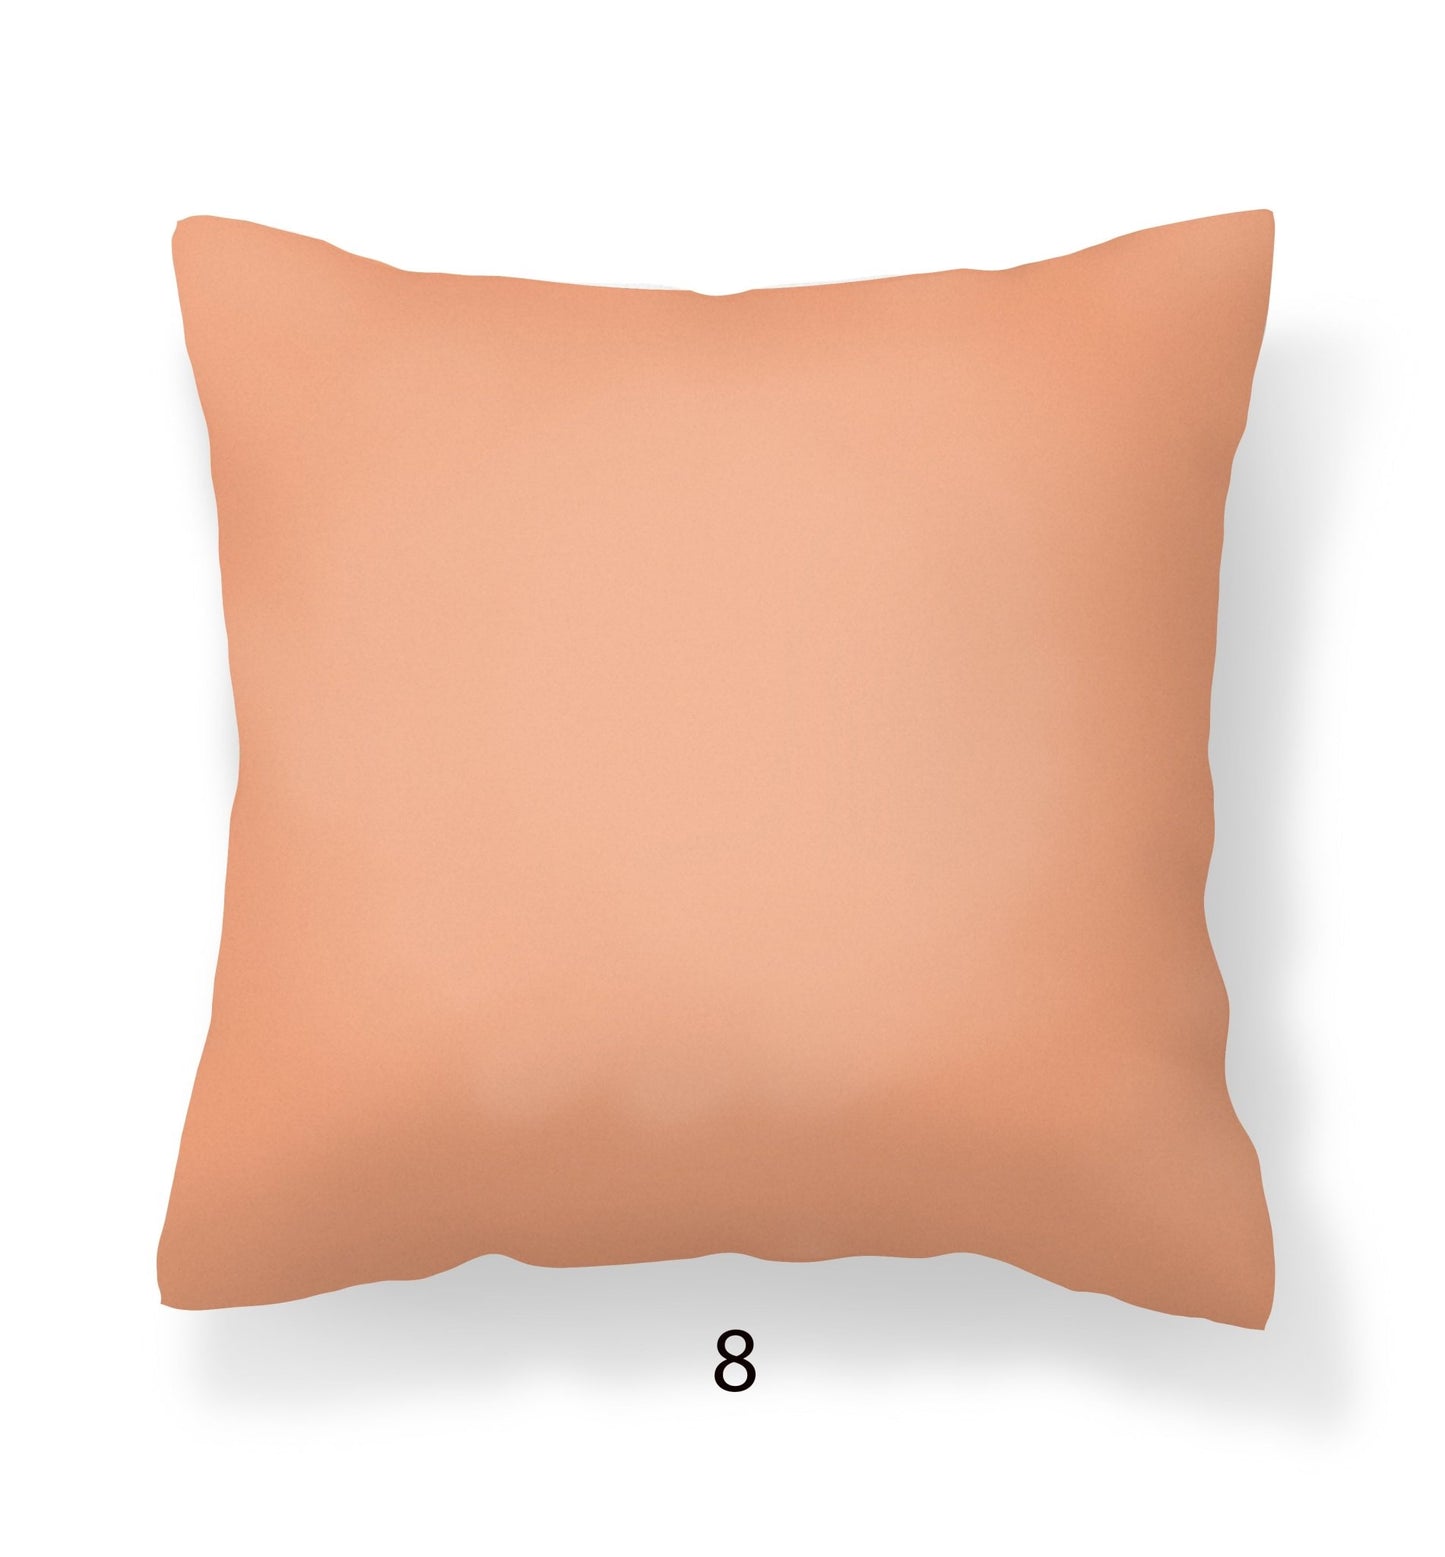 Peach Pillow Covers - Mint Green and Peach Mix and Match Pillow Cases